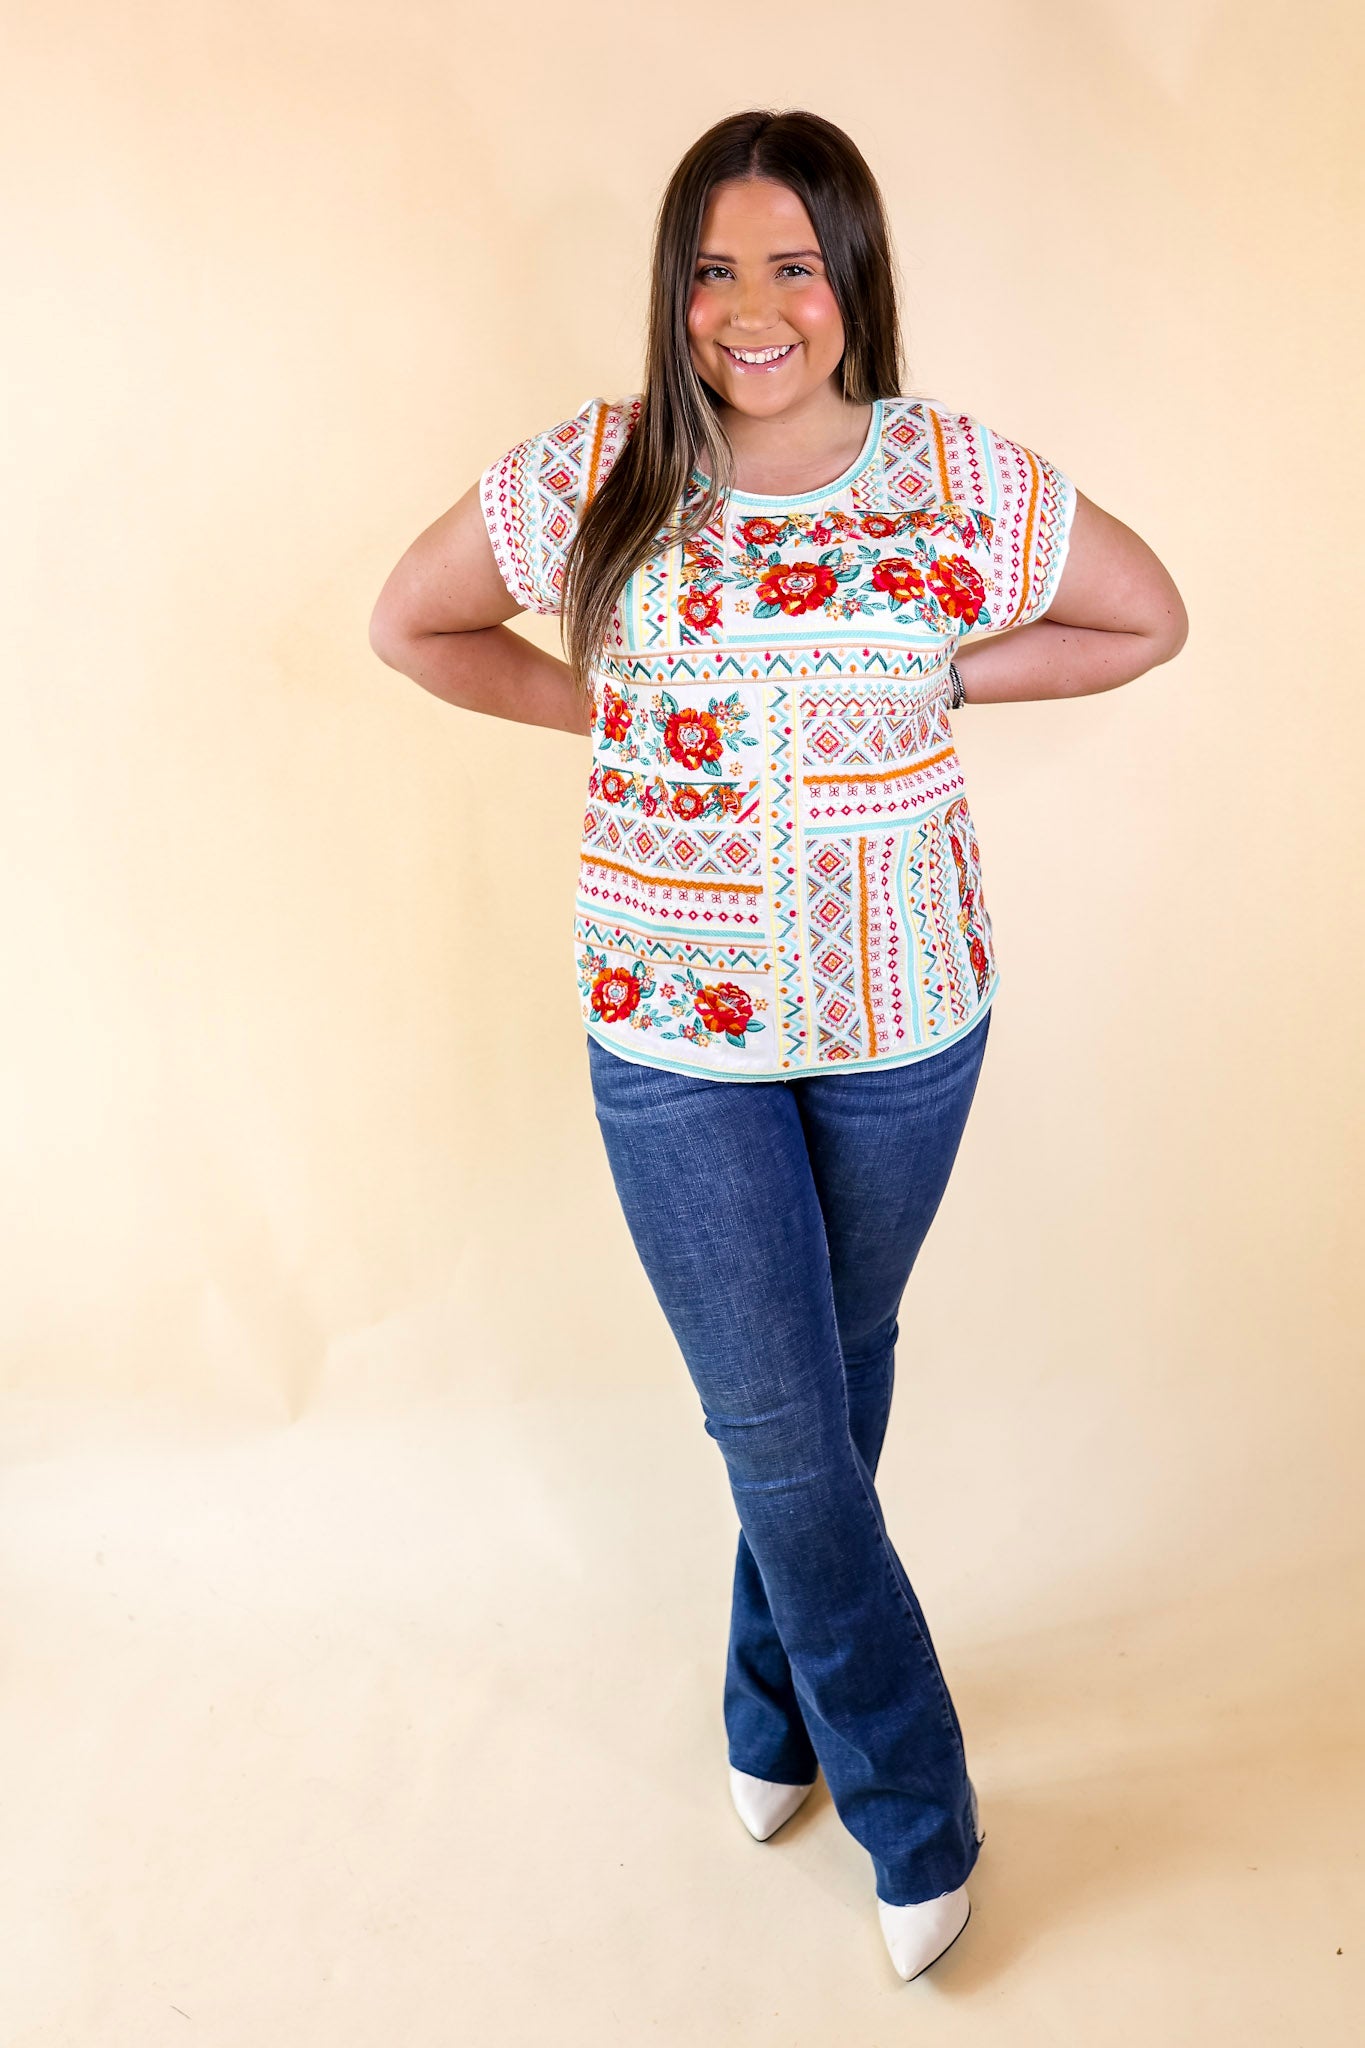 Sonoma Valley Bright Embroidered Short Sleeve Top in White - Giddy Up Glamour Boutique